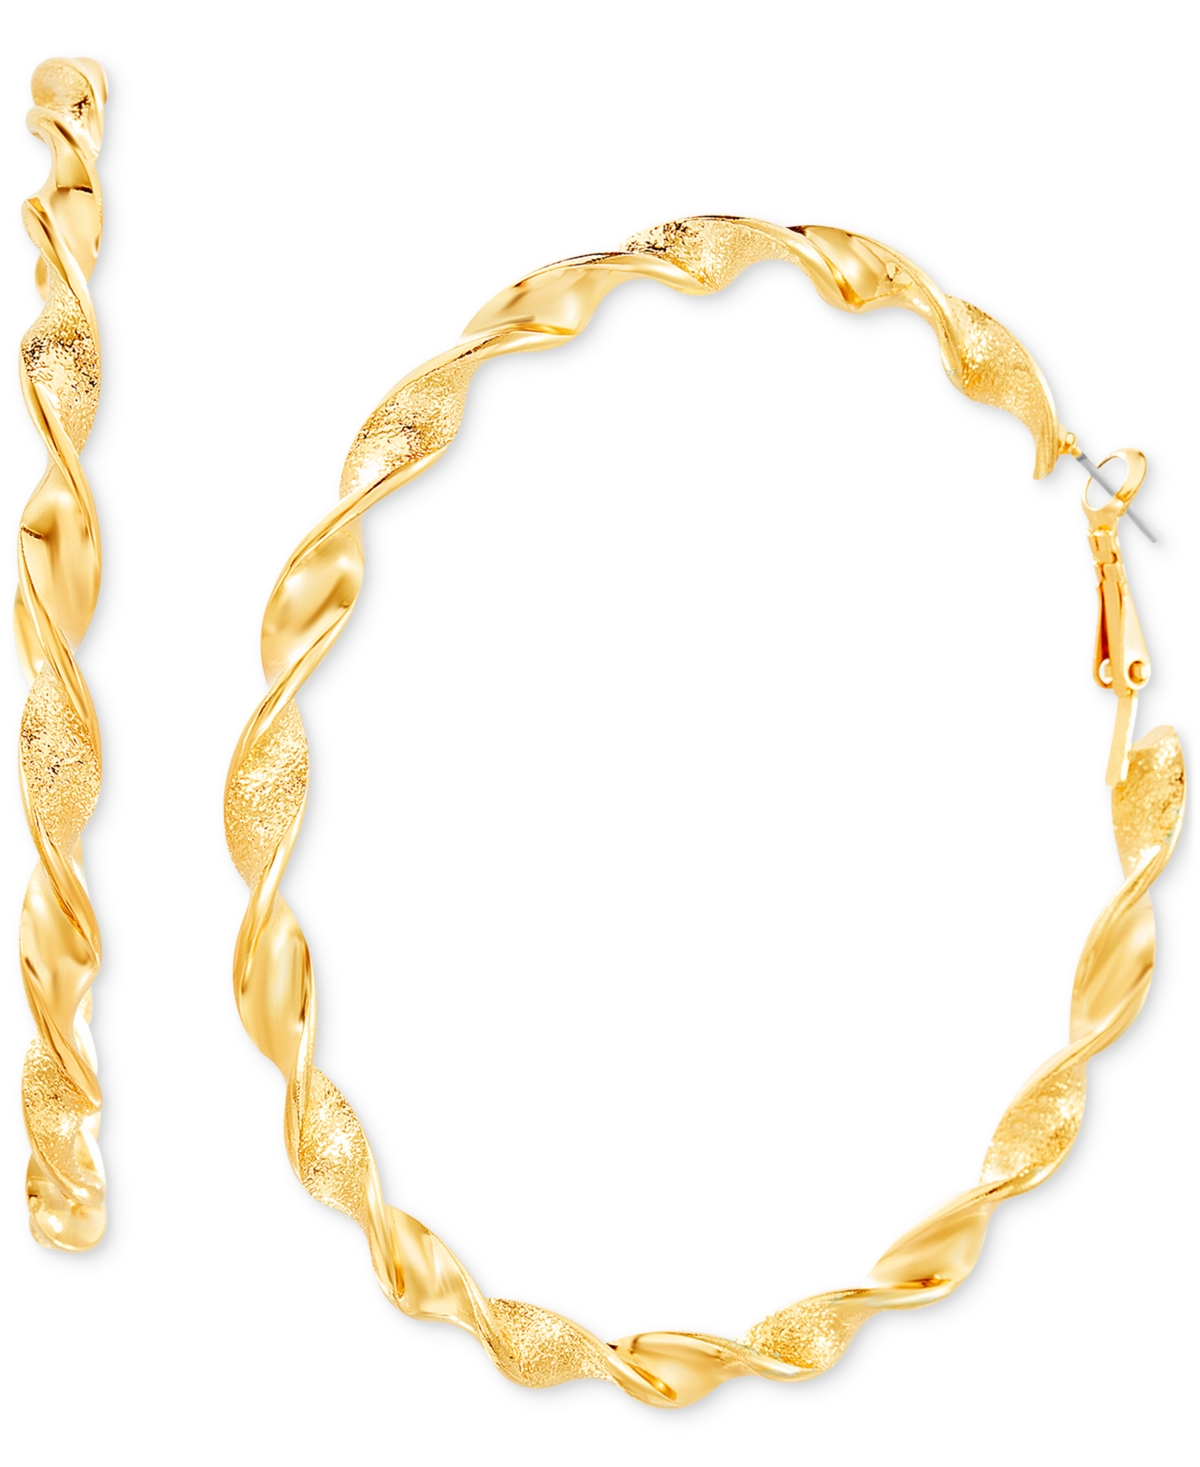 Gold-Tone Twisted Large Hoop Earrings, 3" - Gold